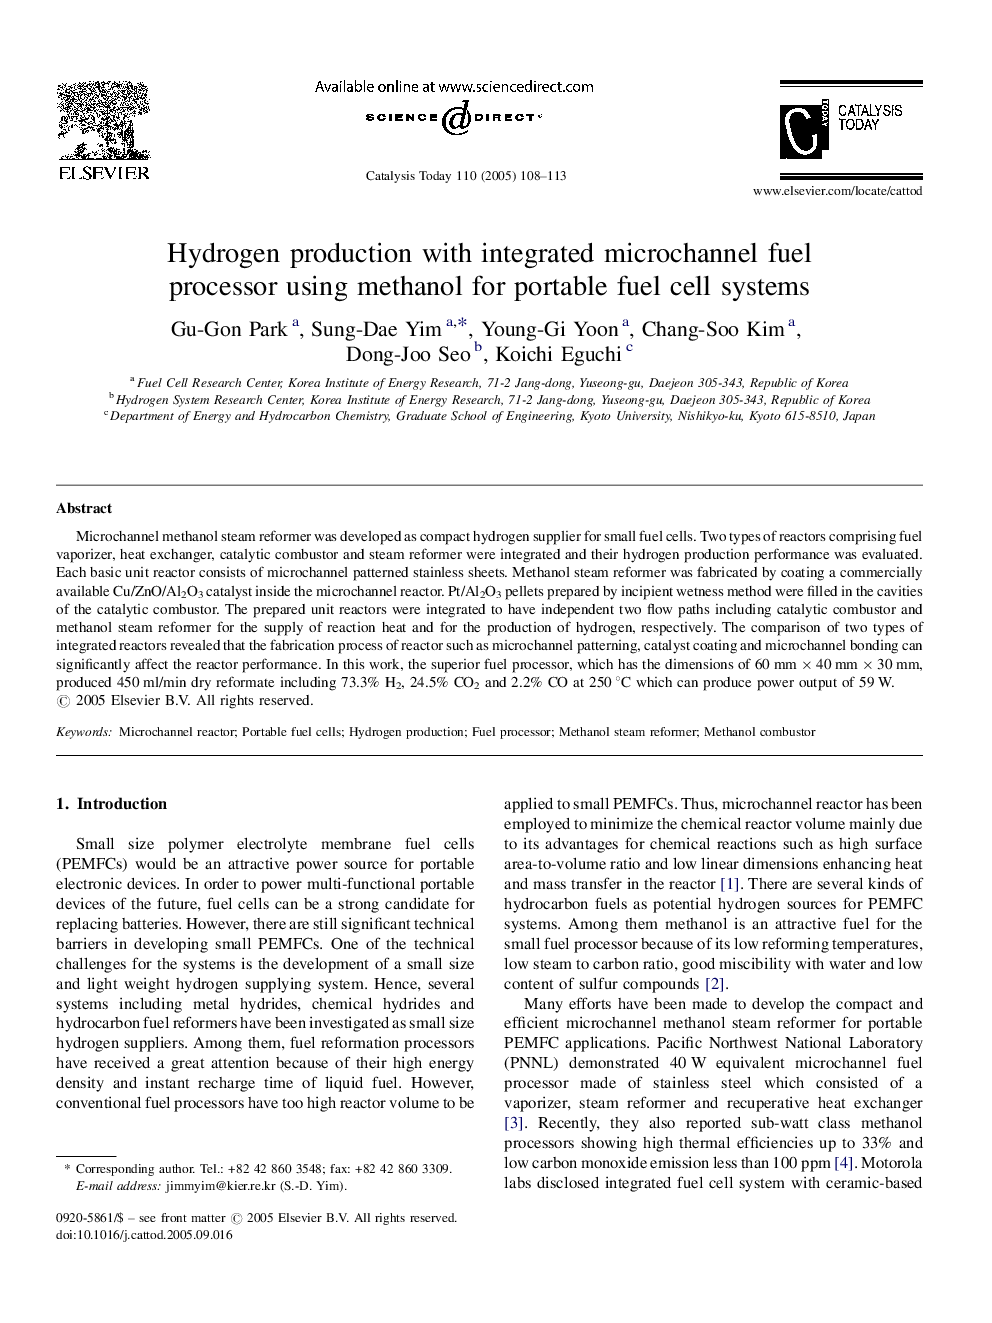 Hydrogen production with integrated microchannel fuel processor using methanol for portable fuel cell systems